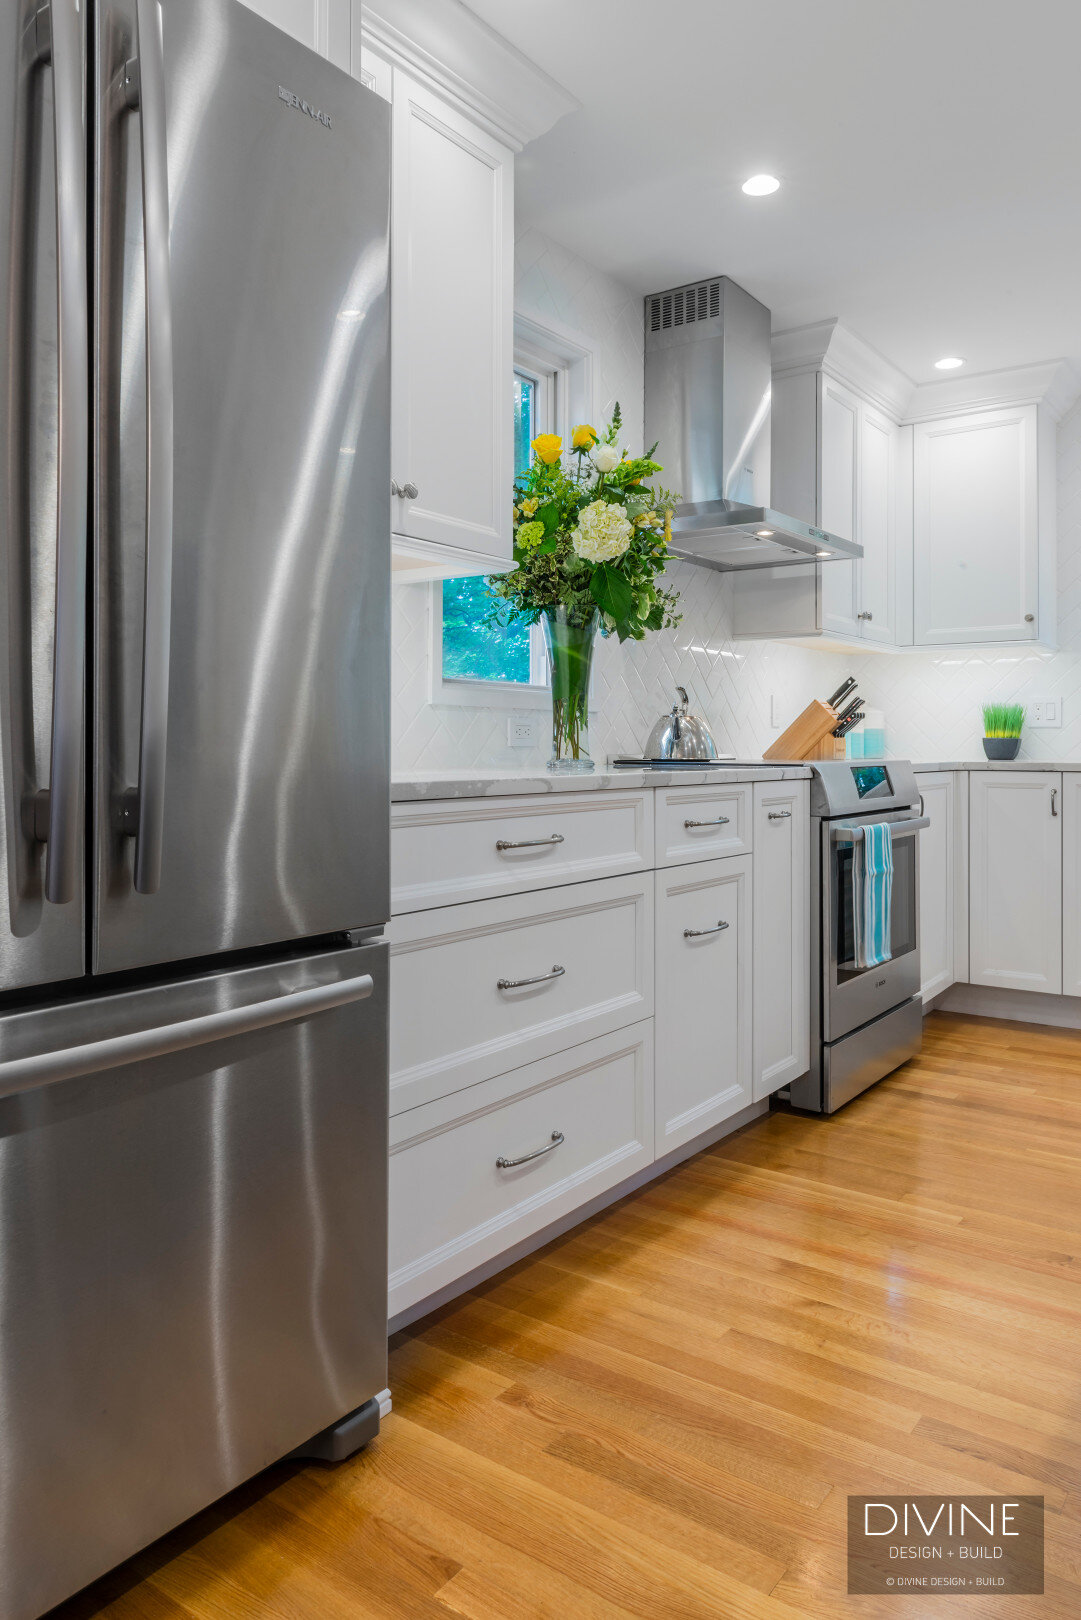 White and grey transitional style kitchen with shaker cabinets and stainless steel appliances. beveled subway tile backsplash in white. 